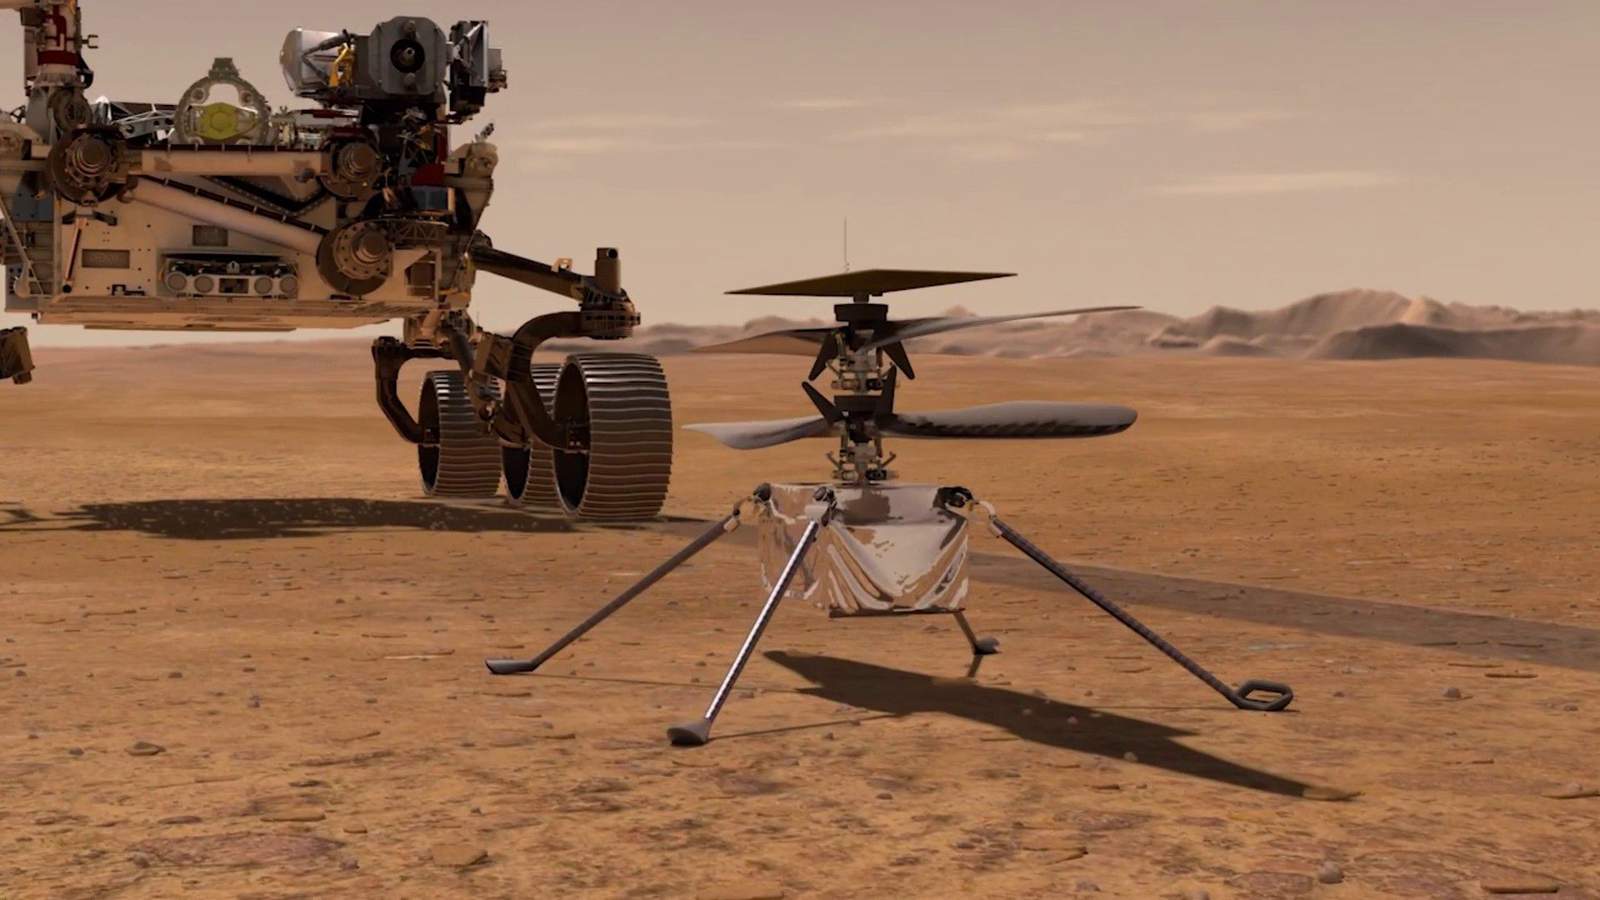 NASA preparing Ingenuity helicopter for flight on Mars after finding airfield